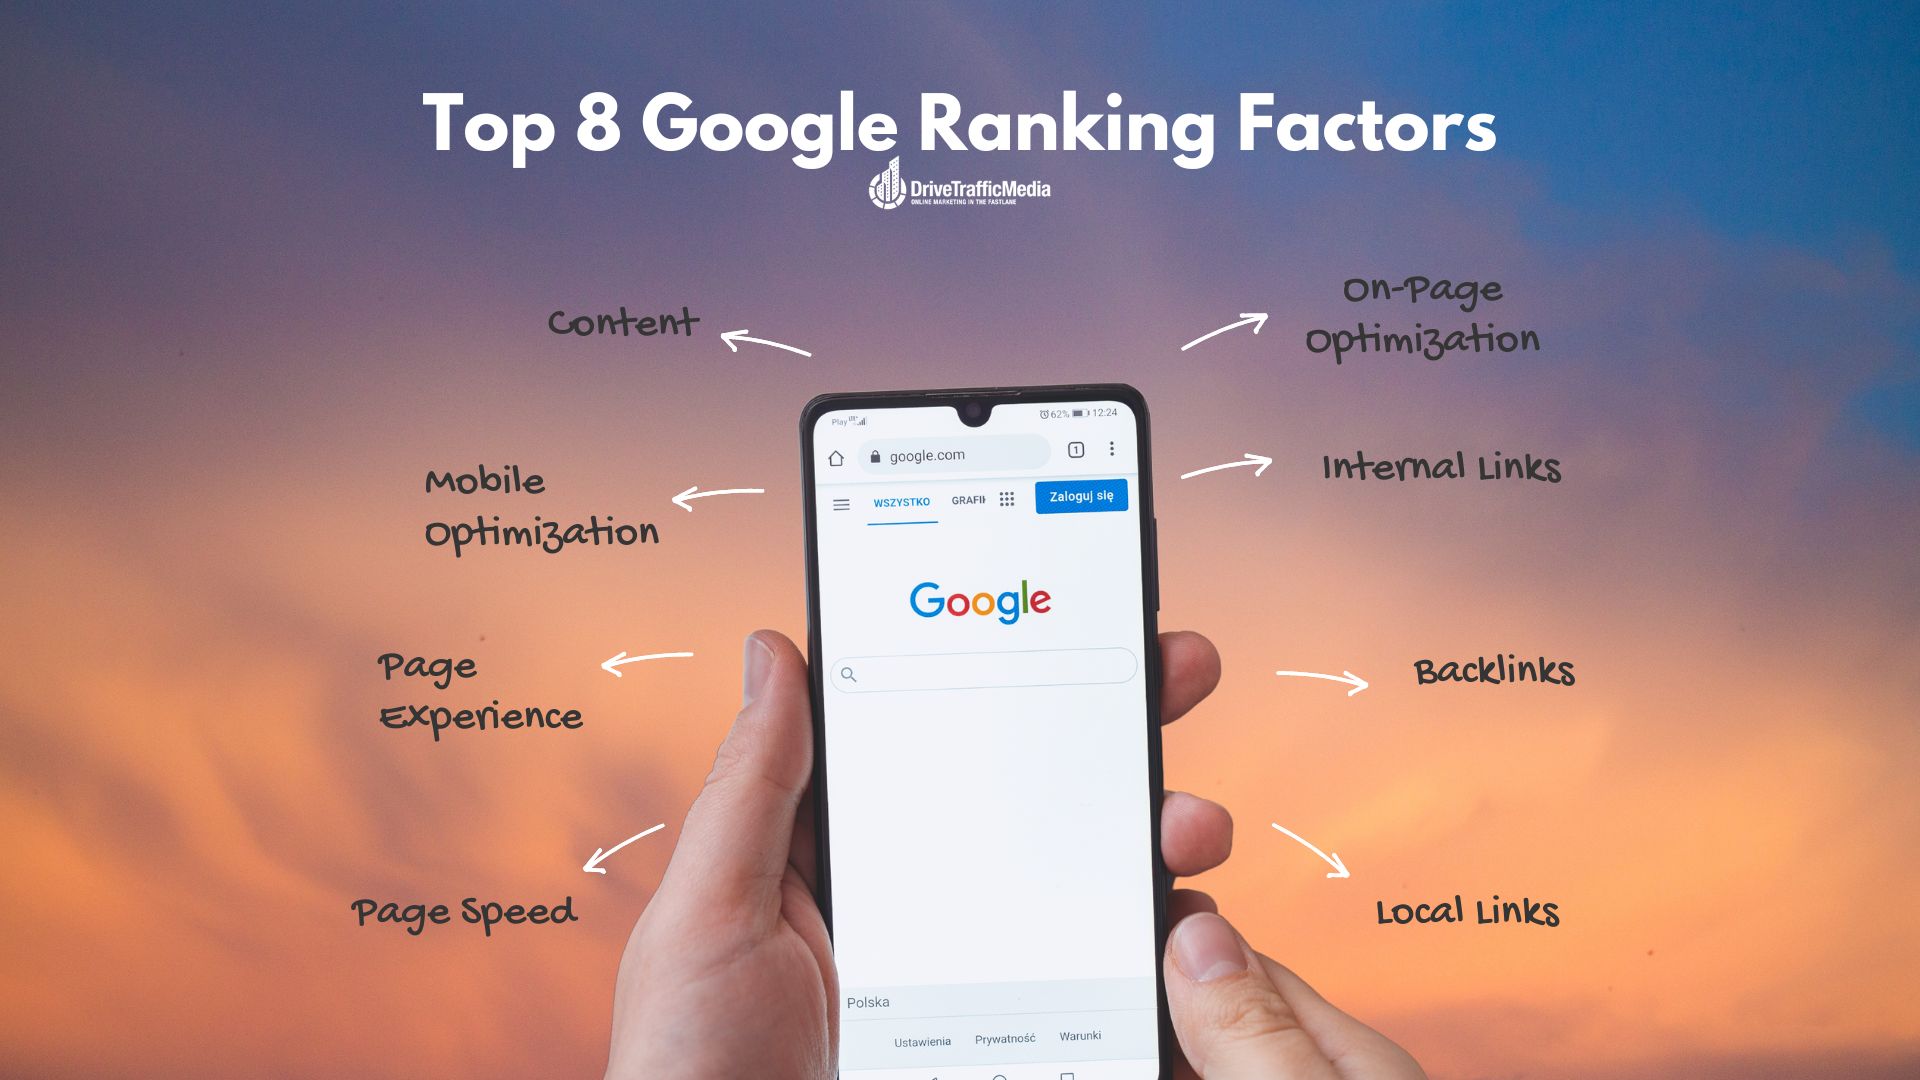 seo-experts-in-orange-county-tell-us-some-of-the-google-ranking-factors